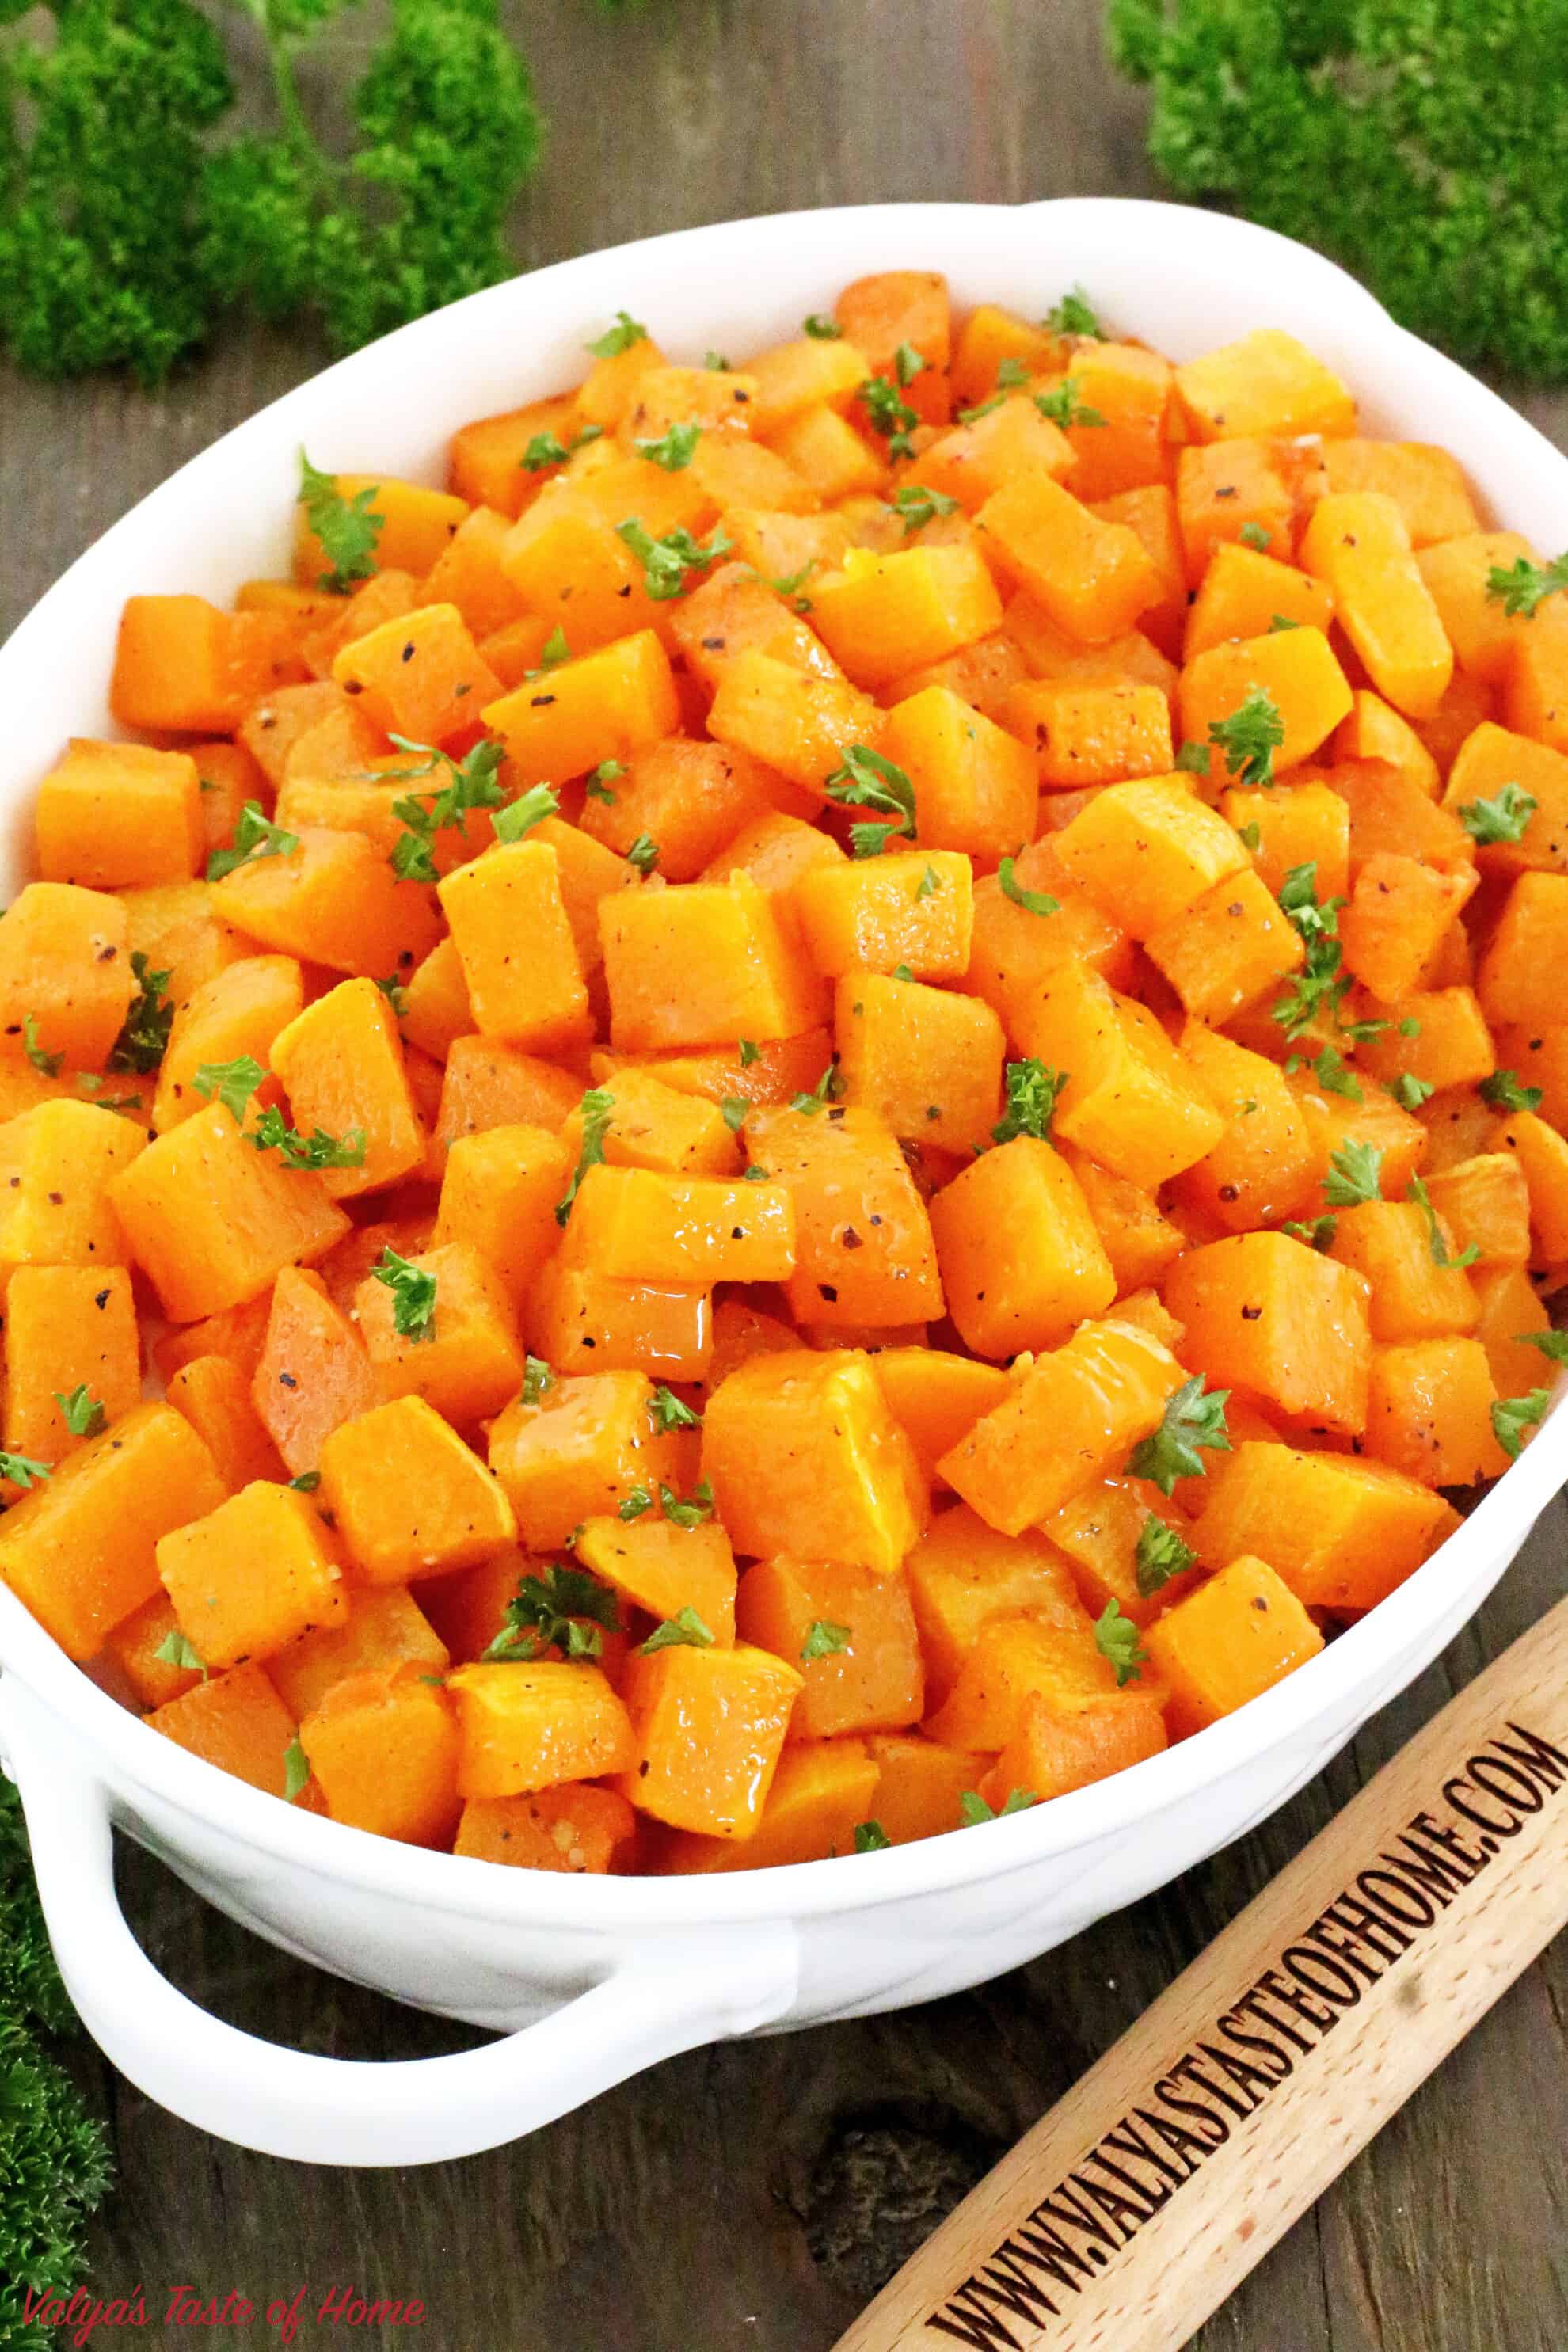 Easy Roasted Butternut Squash Recipe is very nutritious, tasty, and quick to make. Another fall staple, and a must-have at your Thanksgiving gathering. It’s beautiful and deep color that matches the season to decorate your table, and it’s delicious, smooth taste and texture. #organicbutternutsquash #roastedbutternutsquash #fallcooking #valyastasteofhome